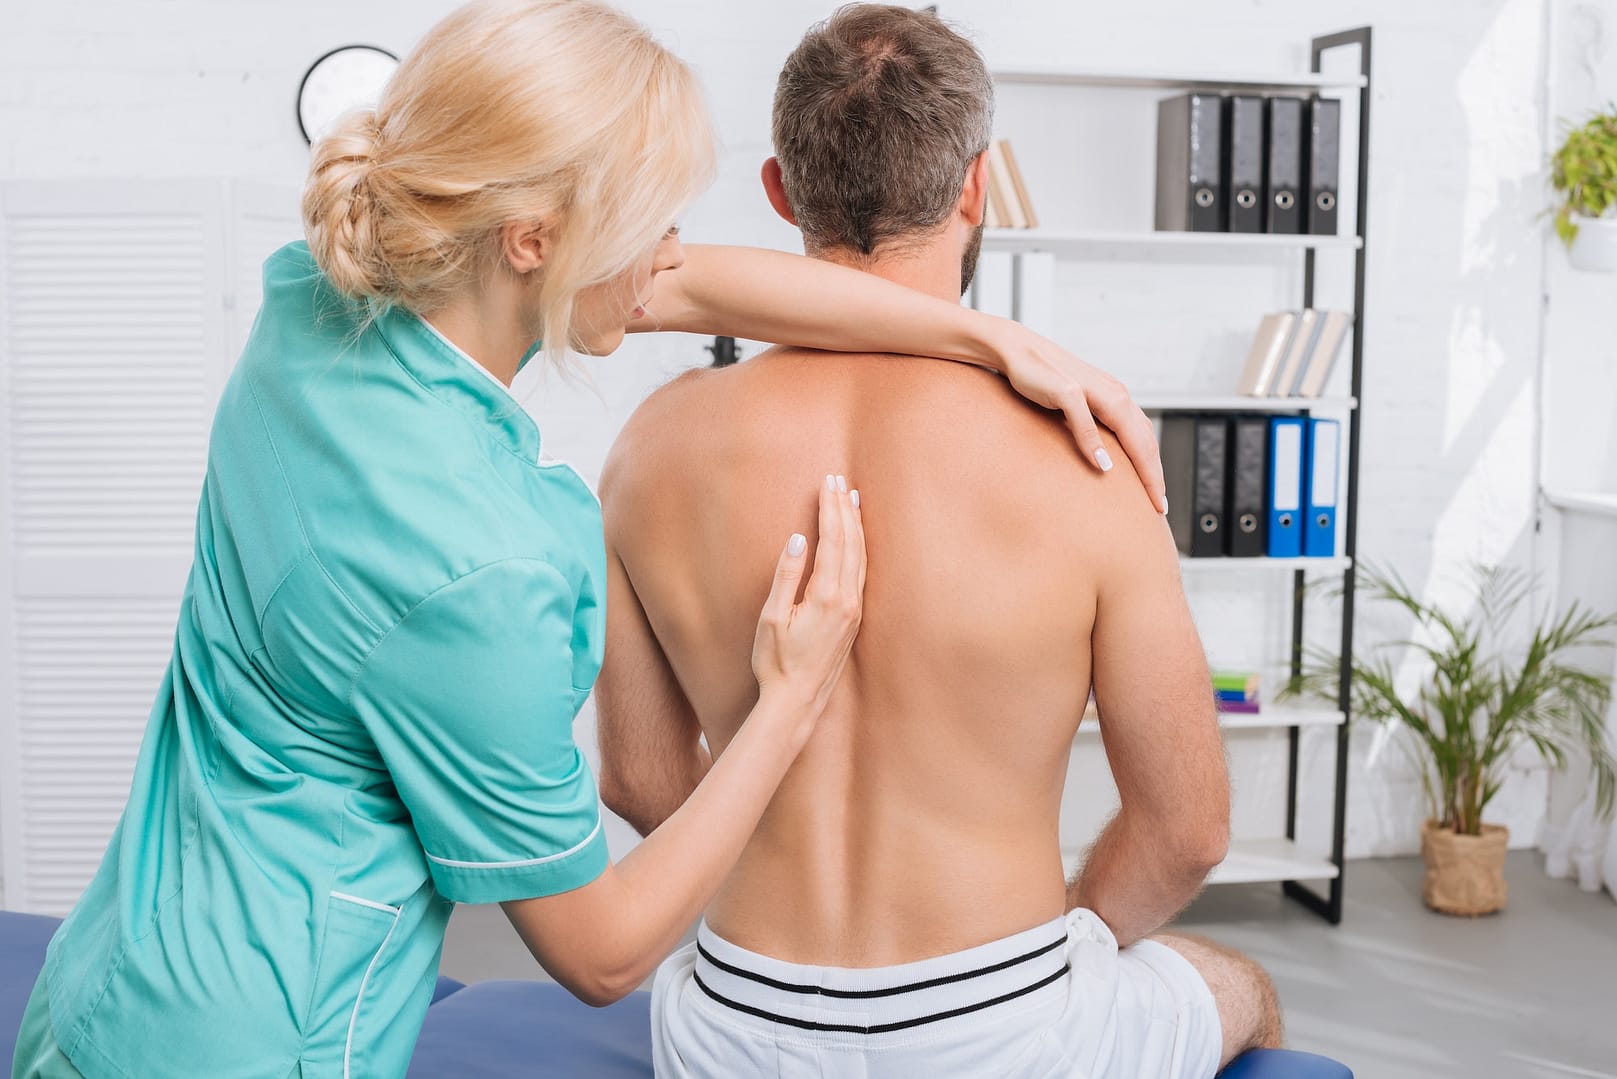 Safe gentle chiropractic care for back pain Lower Back Pain cold therapy to relieve back pain Massage therapy for back pain The Back Pain Project helps with fast affordable back pain treatments in Stamford Darien Norwalk and New Canaan 203-656-3638 fast affordable back pain relief with cold therapy